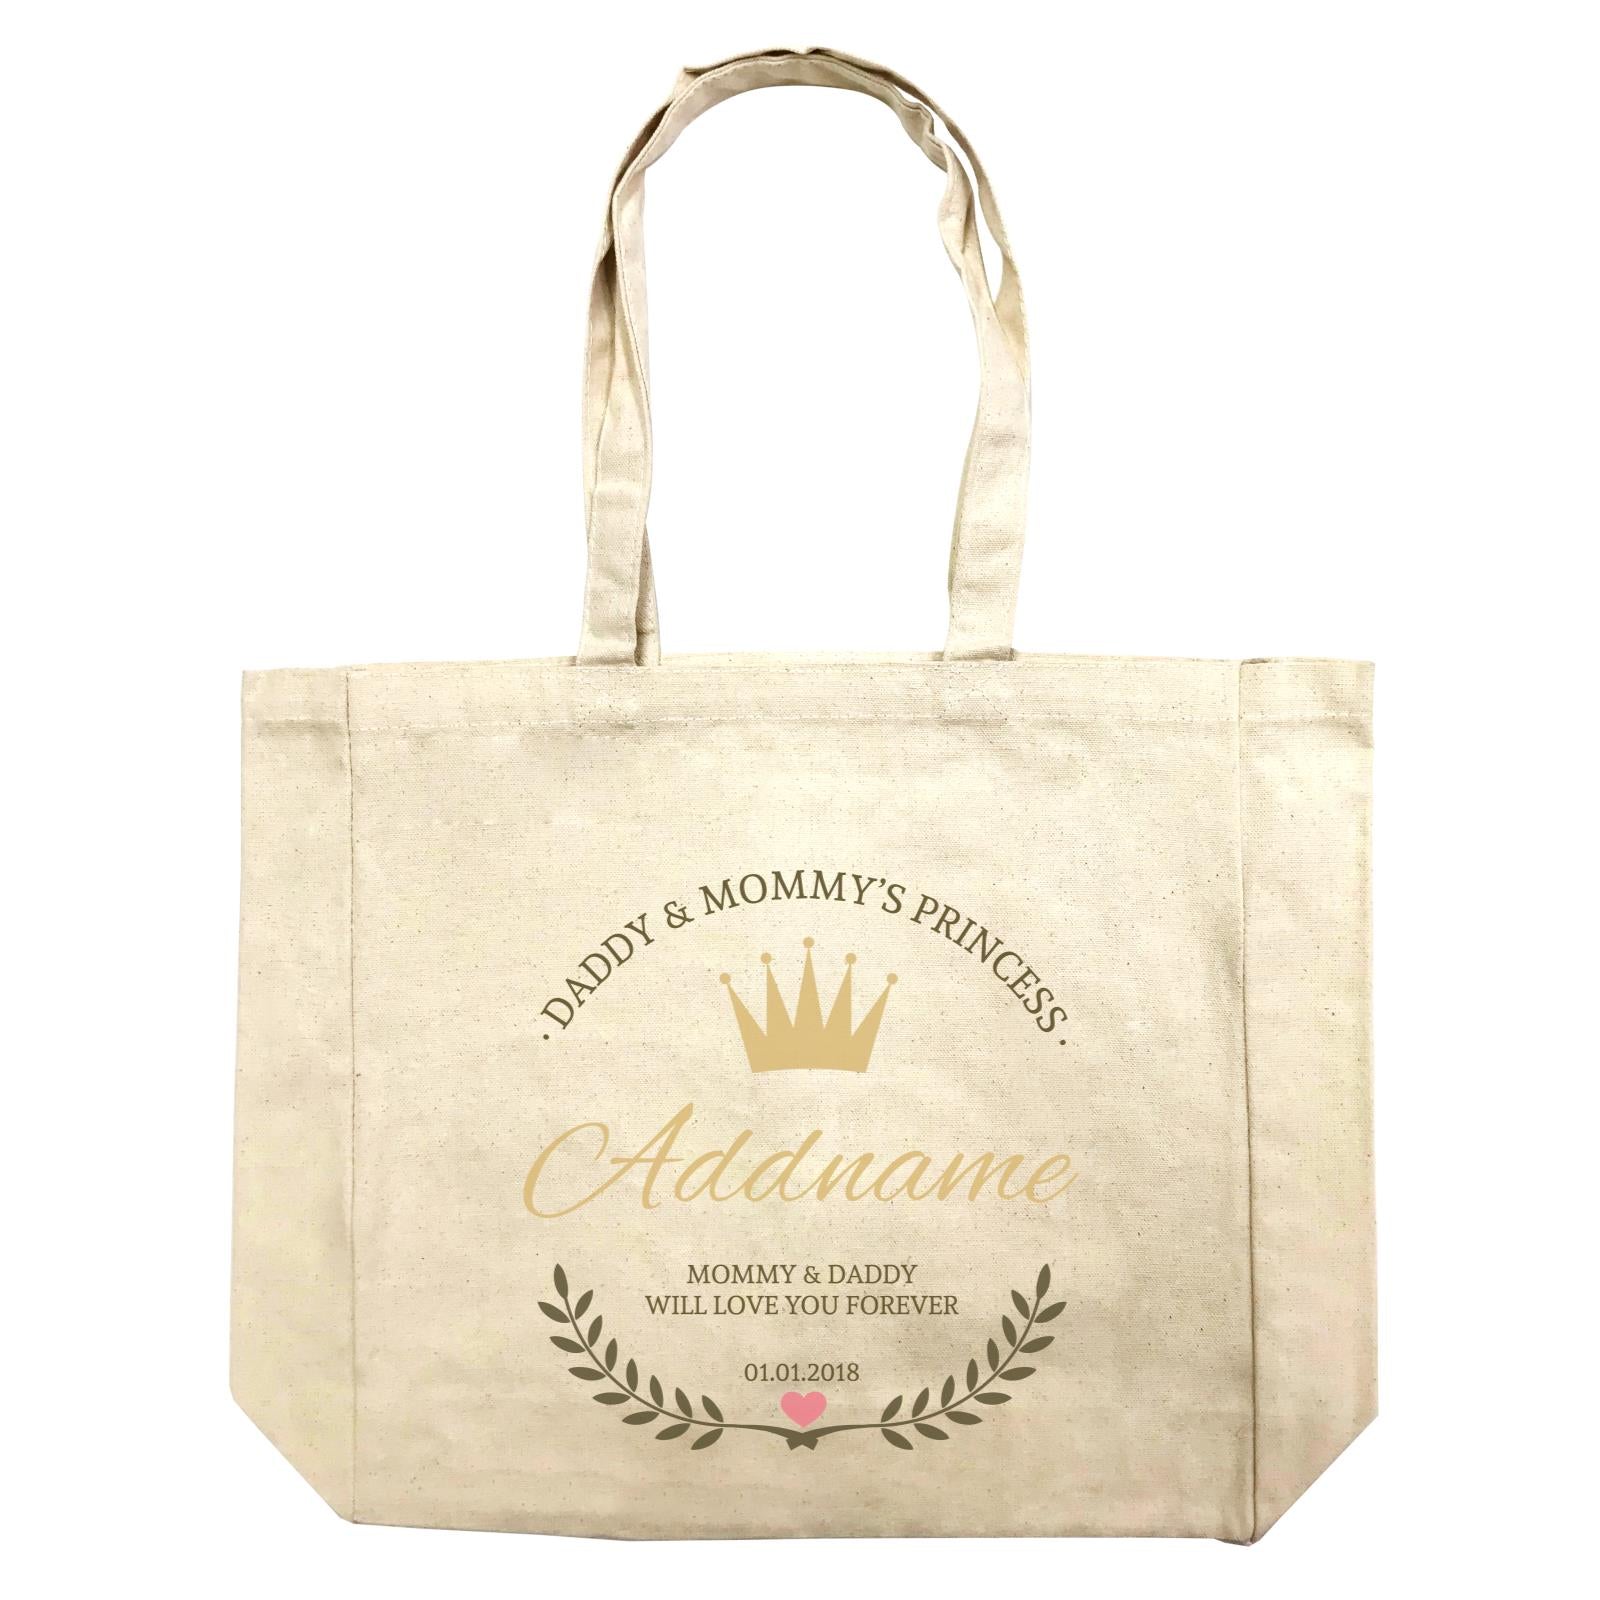 Daddy and Mommy's Princess with Tiara Wreath Personazliable with Name Text and Date Shopping Bag